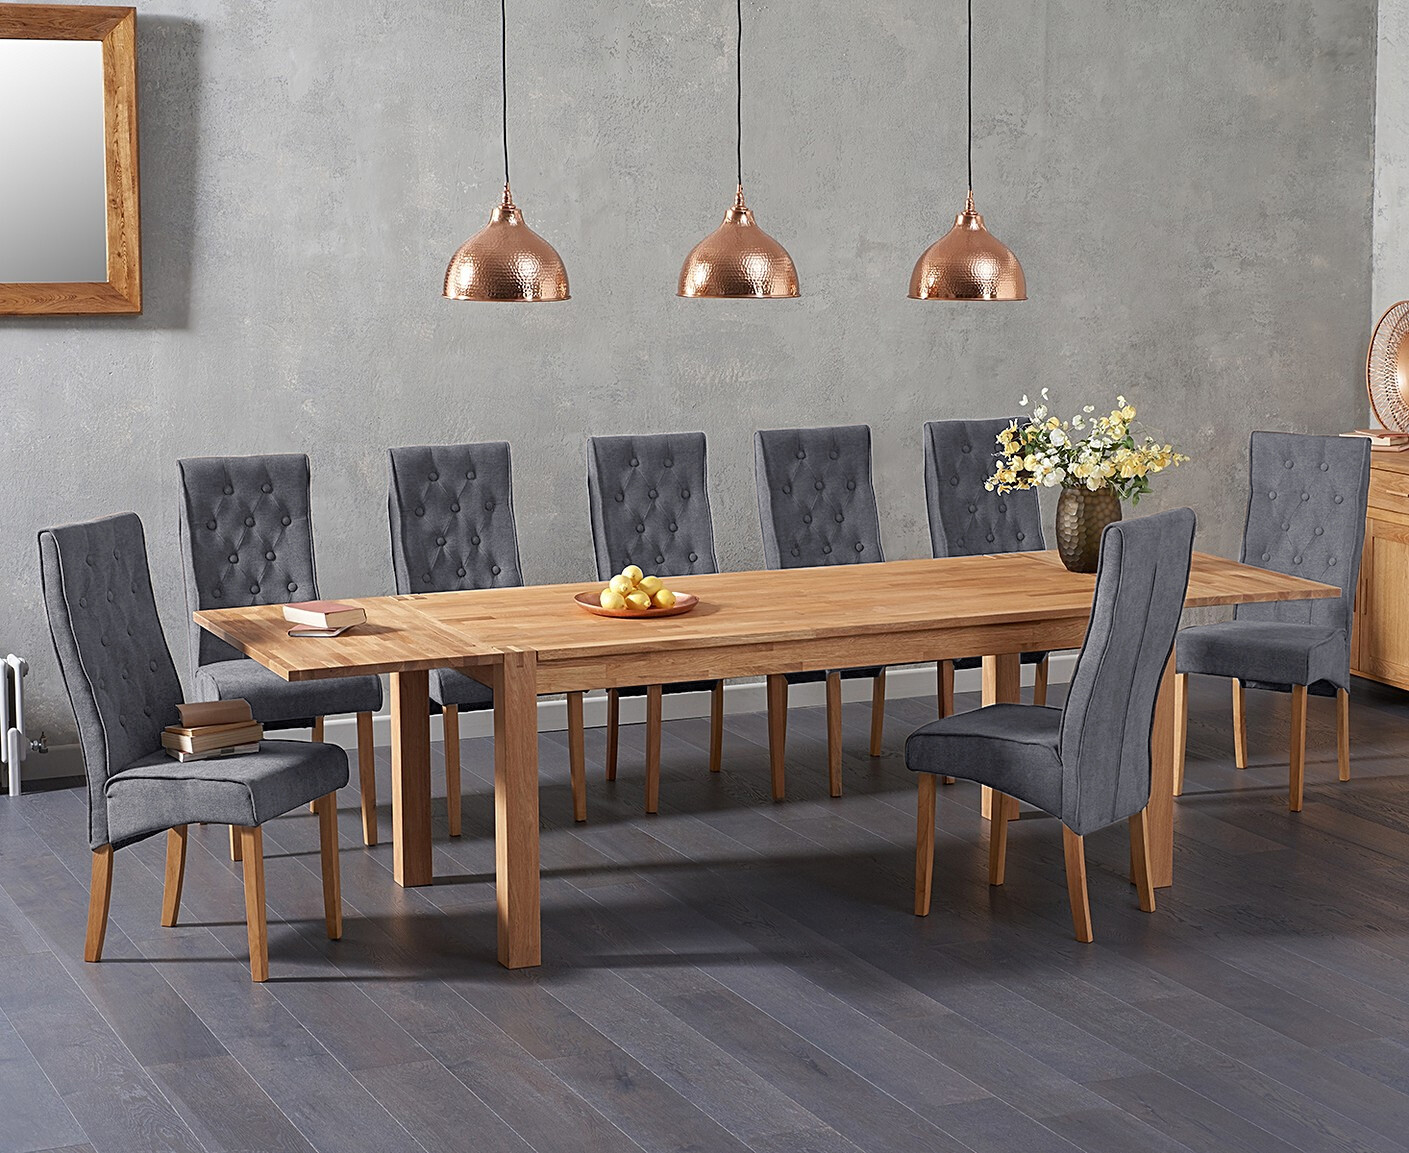 Thetford 180cm Oak Dining Table With 8 Grey Maya Chairs With Thetford 45cm Oak Extensions